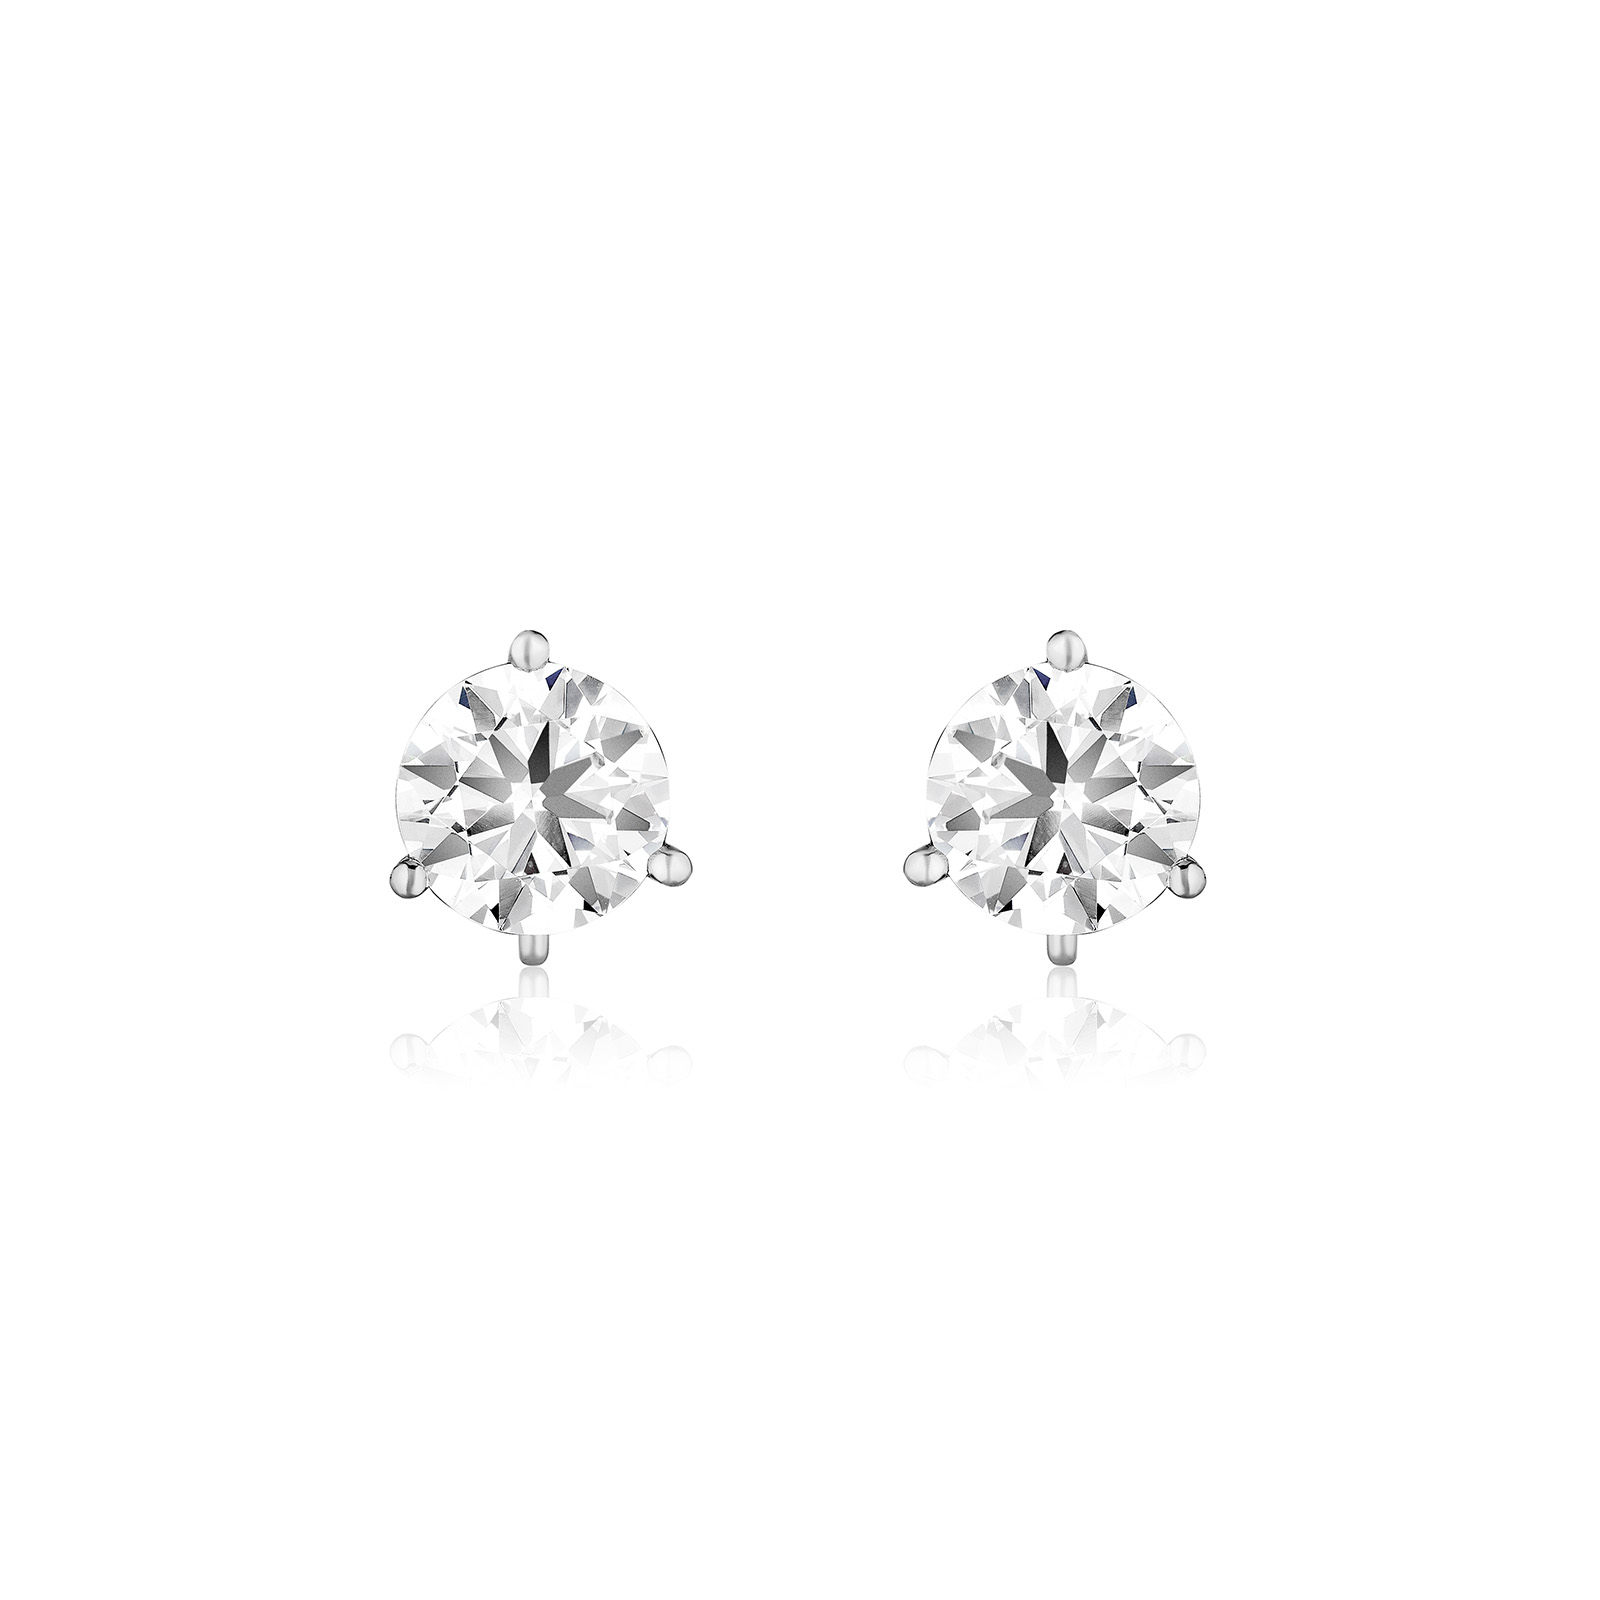 Three-prong 18-karat white gold stud featuring 6.5-mm cubic zirconia weighing a total of 3.41 carats with 8-mm friction back in 14-karat white gold for comfort and security.